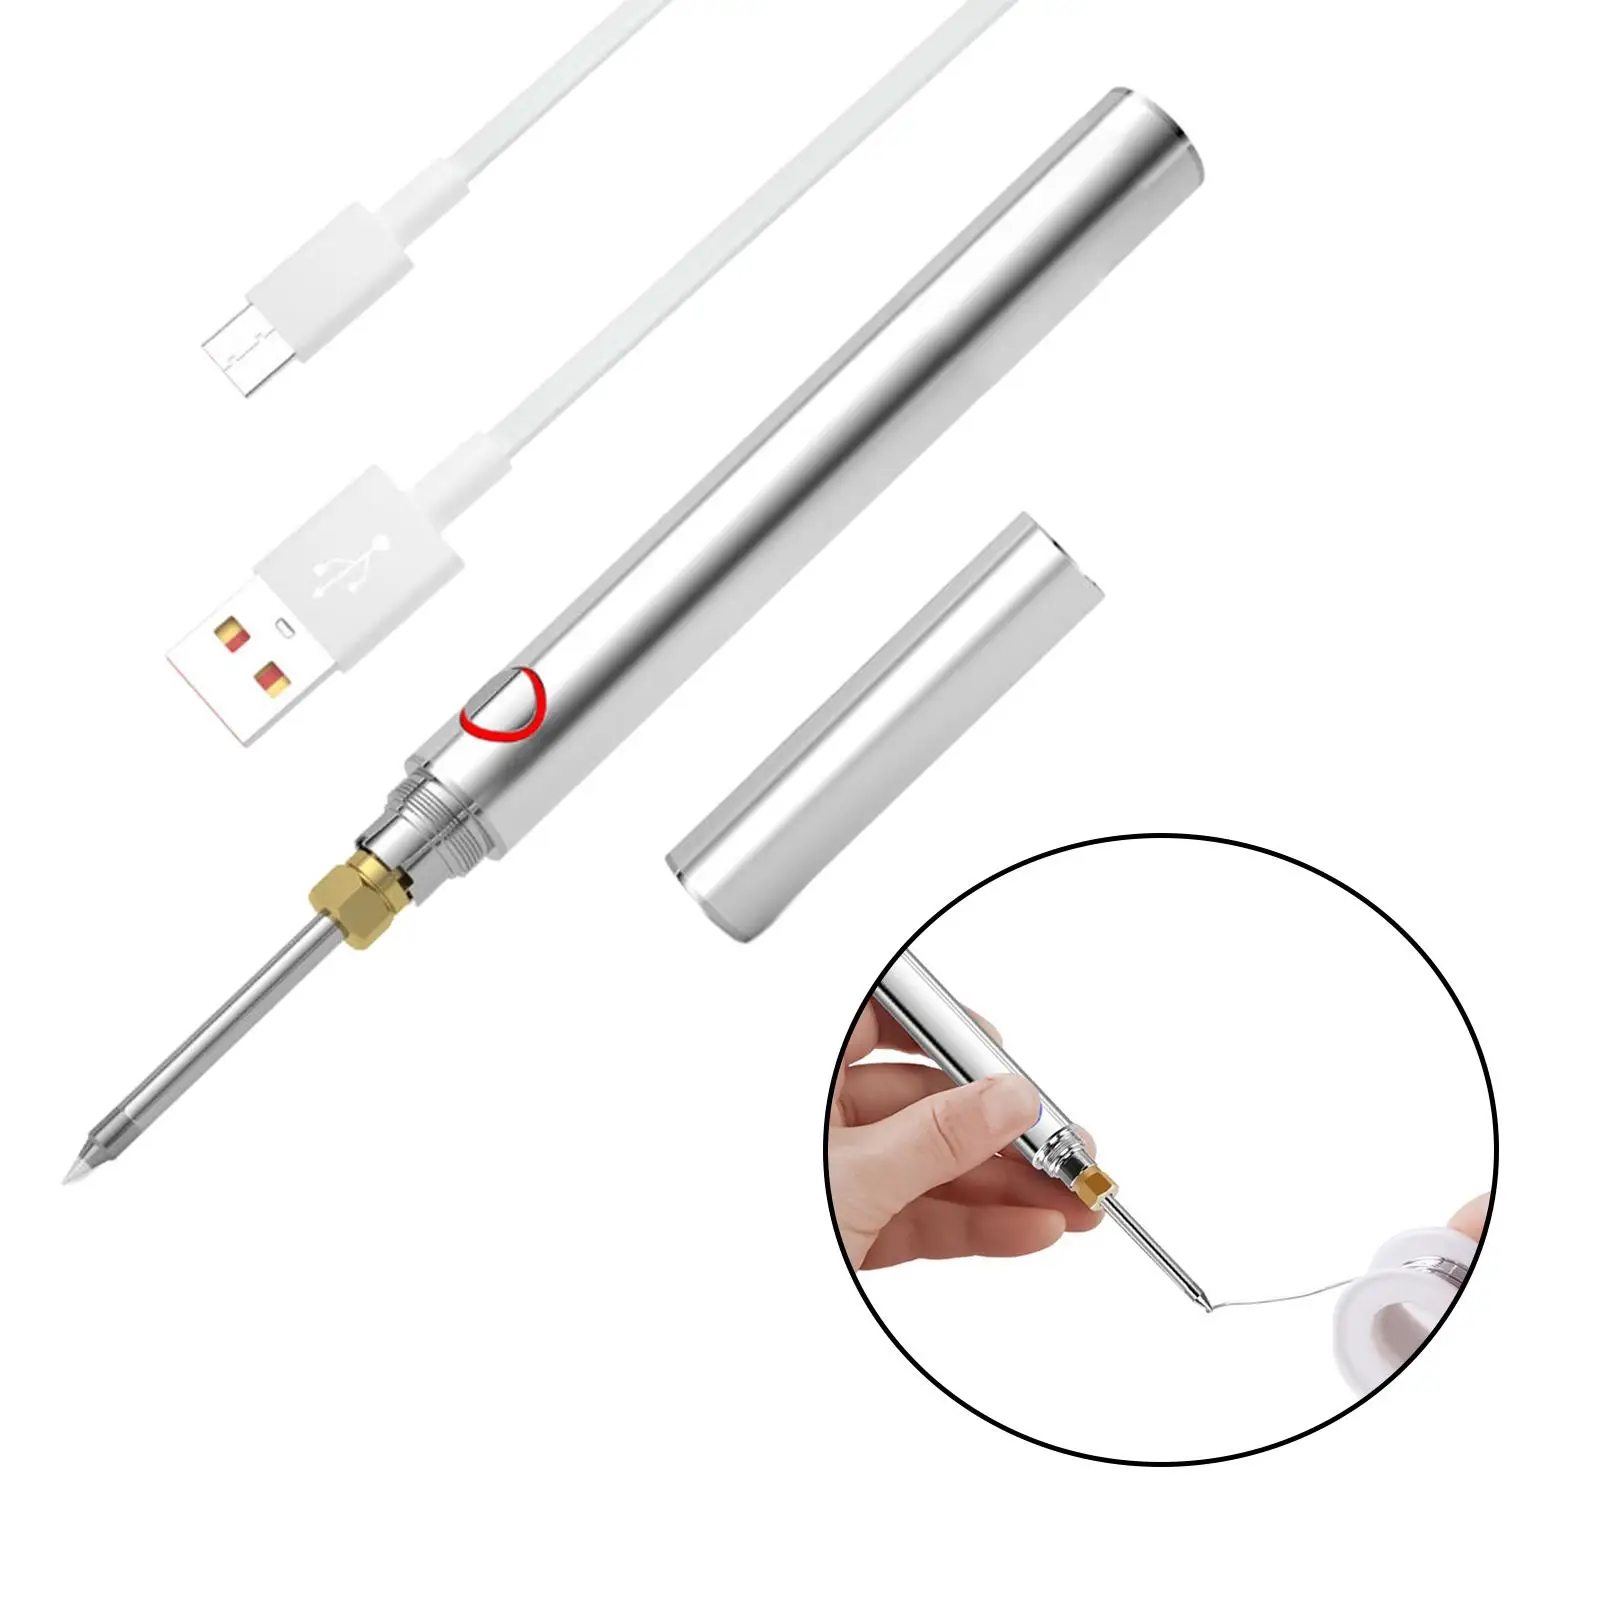 Soldering Welding Iron Solder Iron Electric Soldering Iron Pen for Electronics Jewelry Home Repairs DIY Craft Project Computers